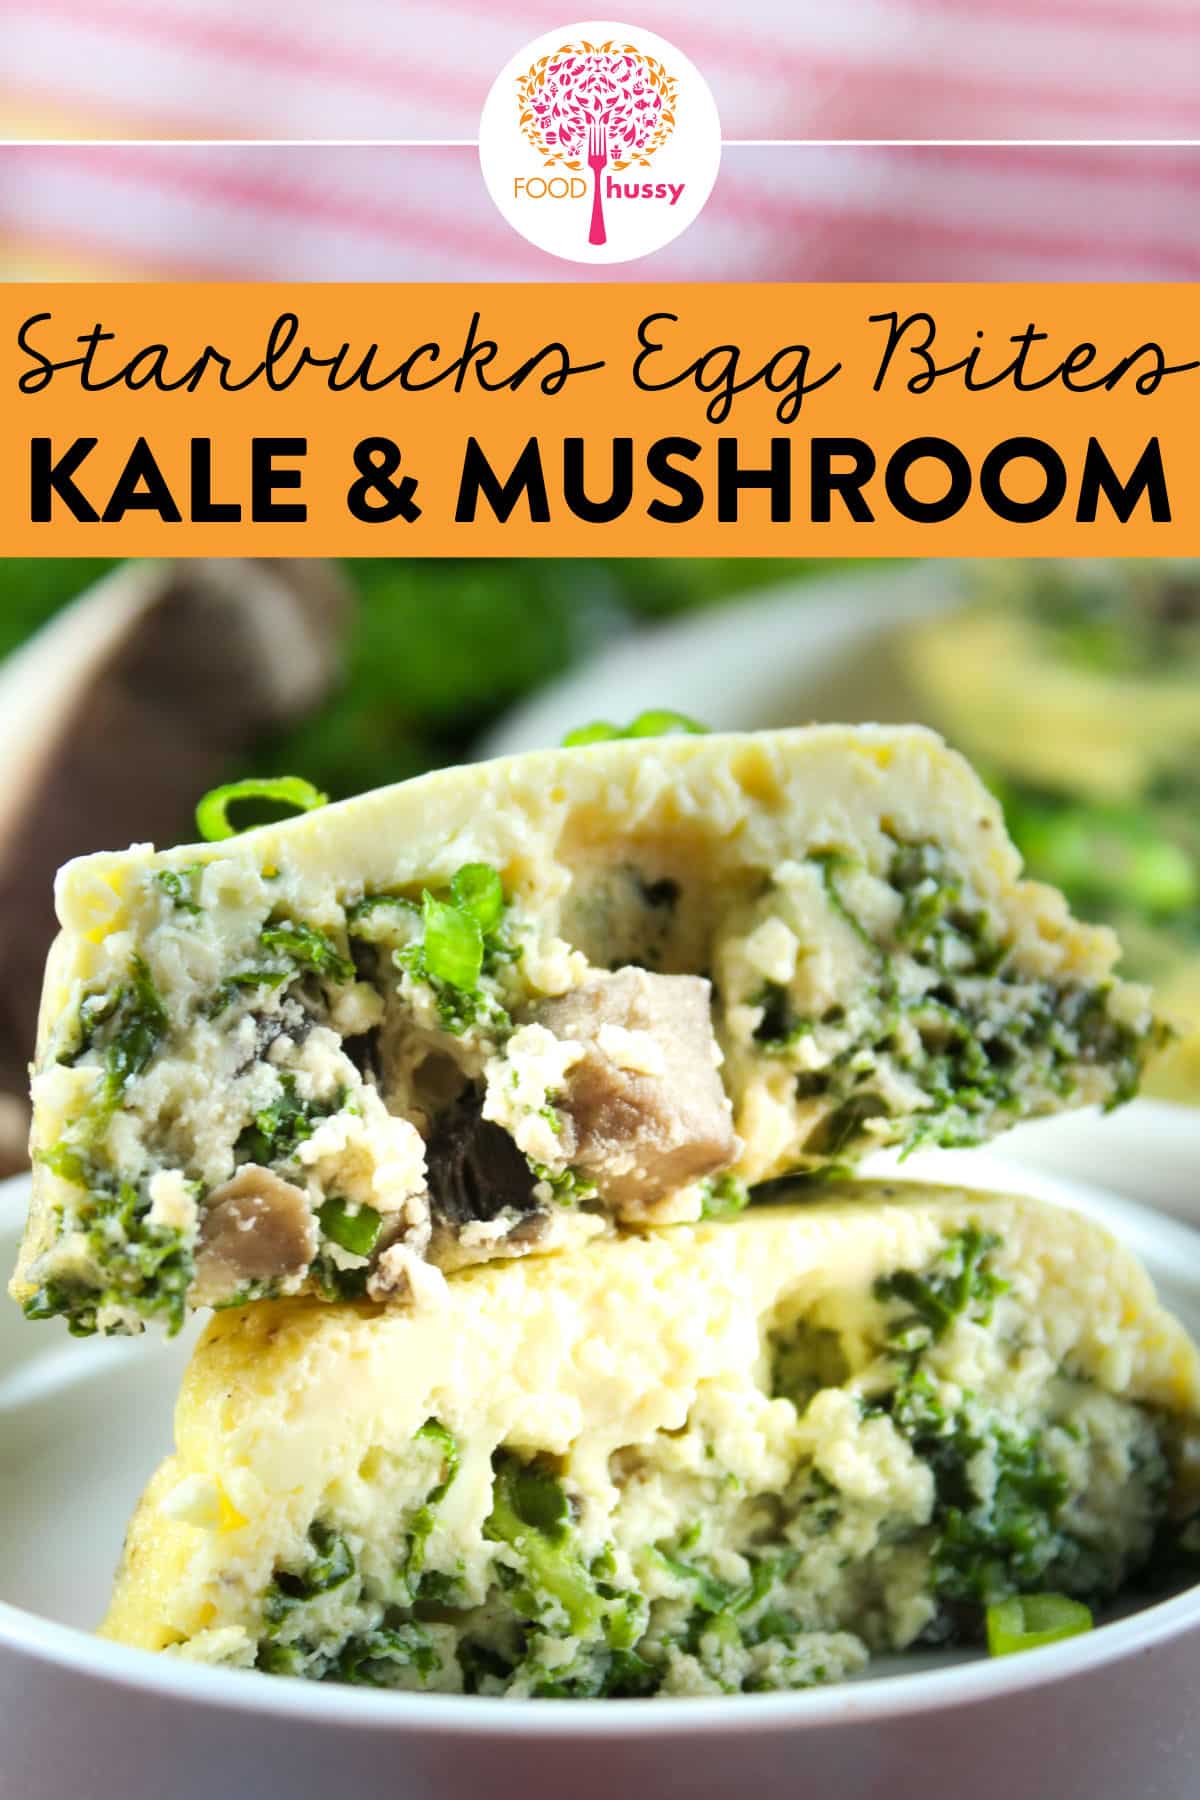 These Copycat Starbucks Kale & Mushroom Egg Bites are probably the healthiest breakfast I've had in forever! Filled with meaty portobella mushrooms, shredded cheese and healthy kale - you'll love every bite! (And you don't need a Sous Vide machine!) via @foodhussy